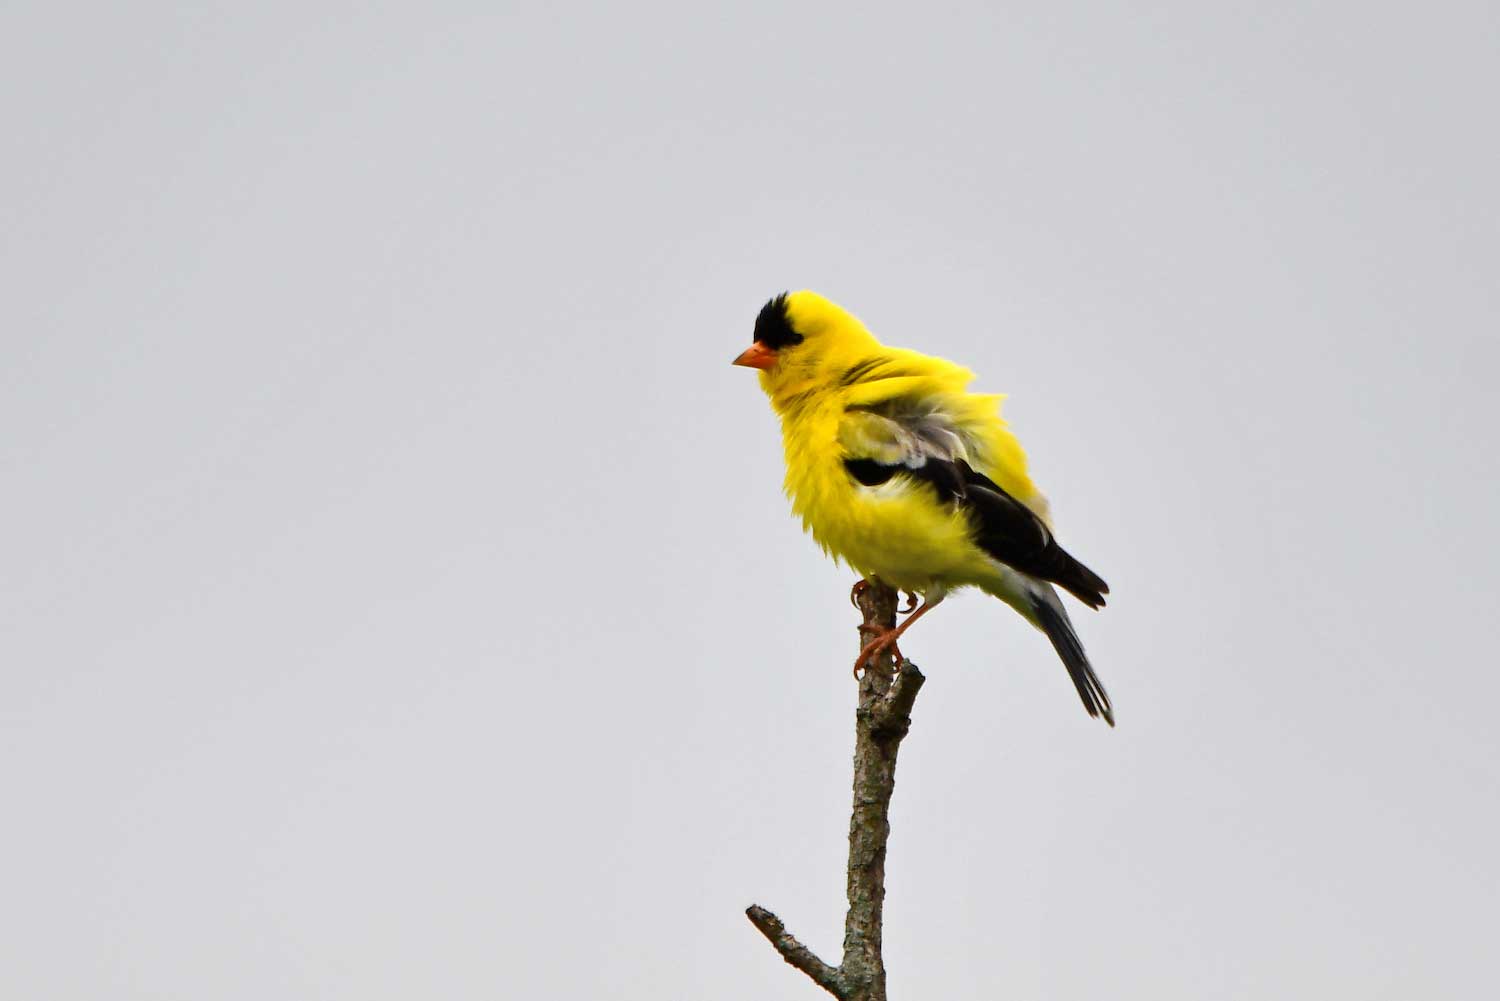 A goldfinch perched atop a tree branch.